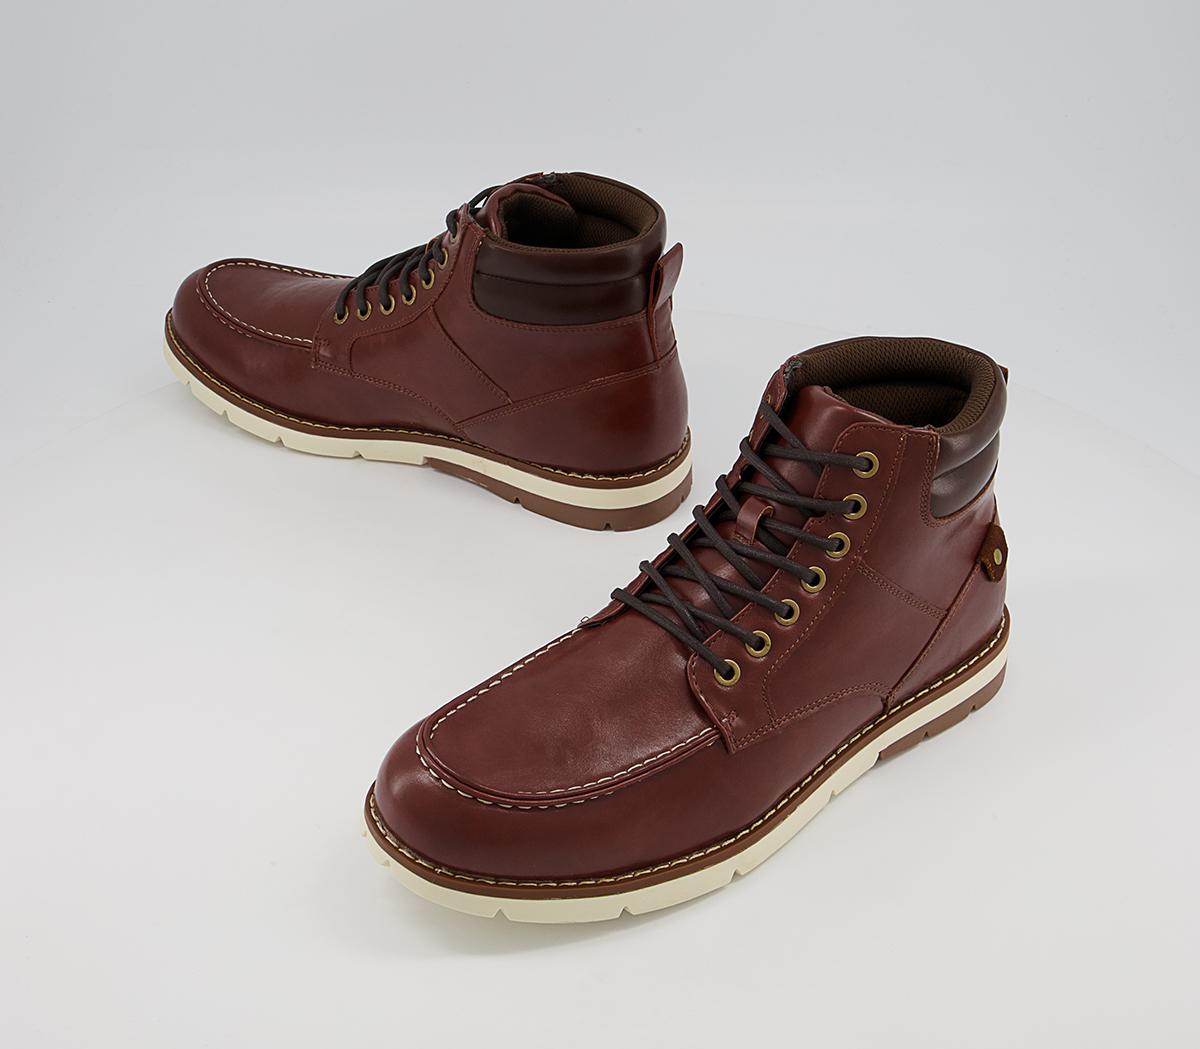 OFFICE Blaney Apron Toe Mid Boots Red Brown - Men’s Boots